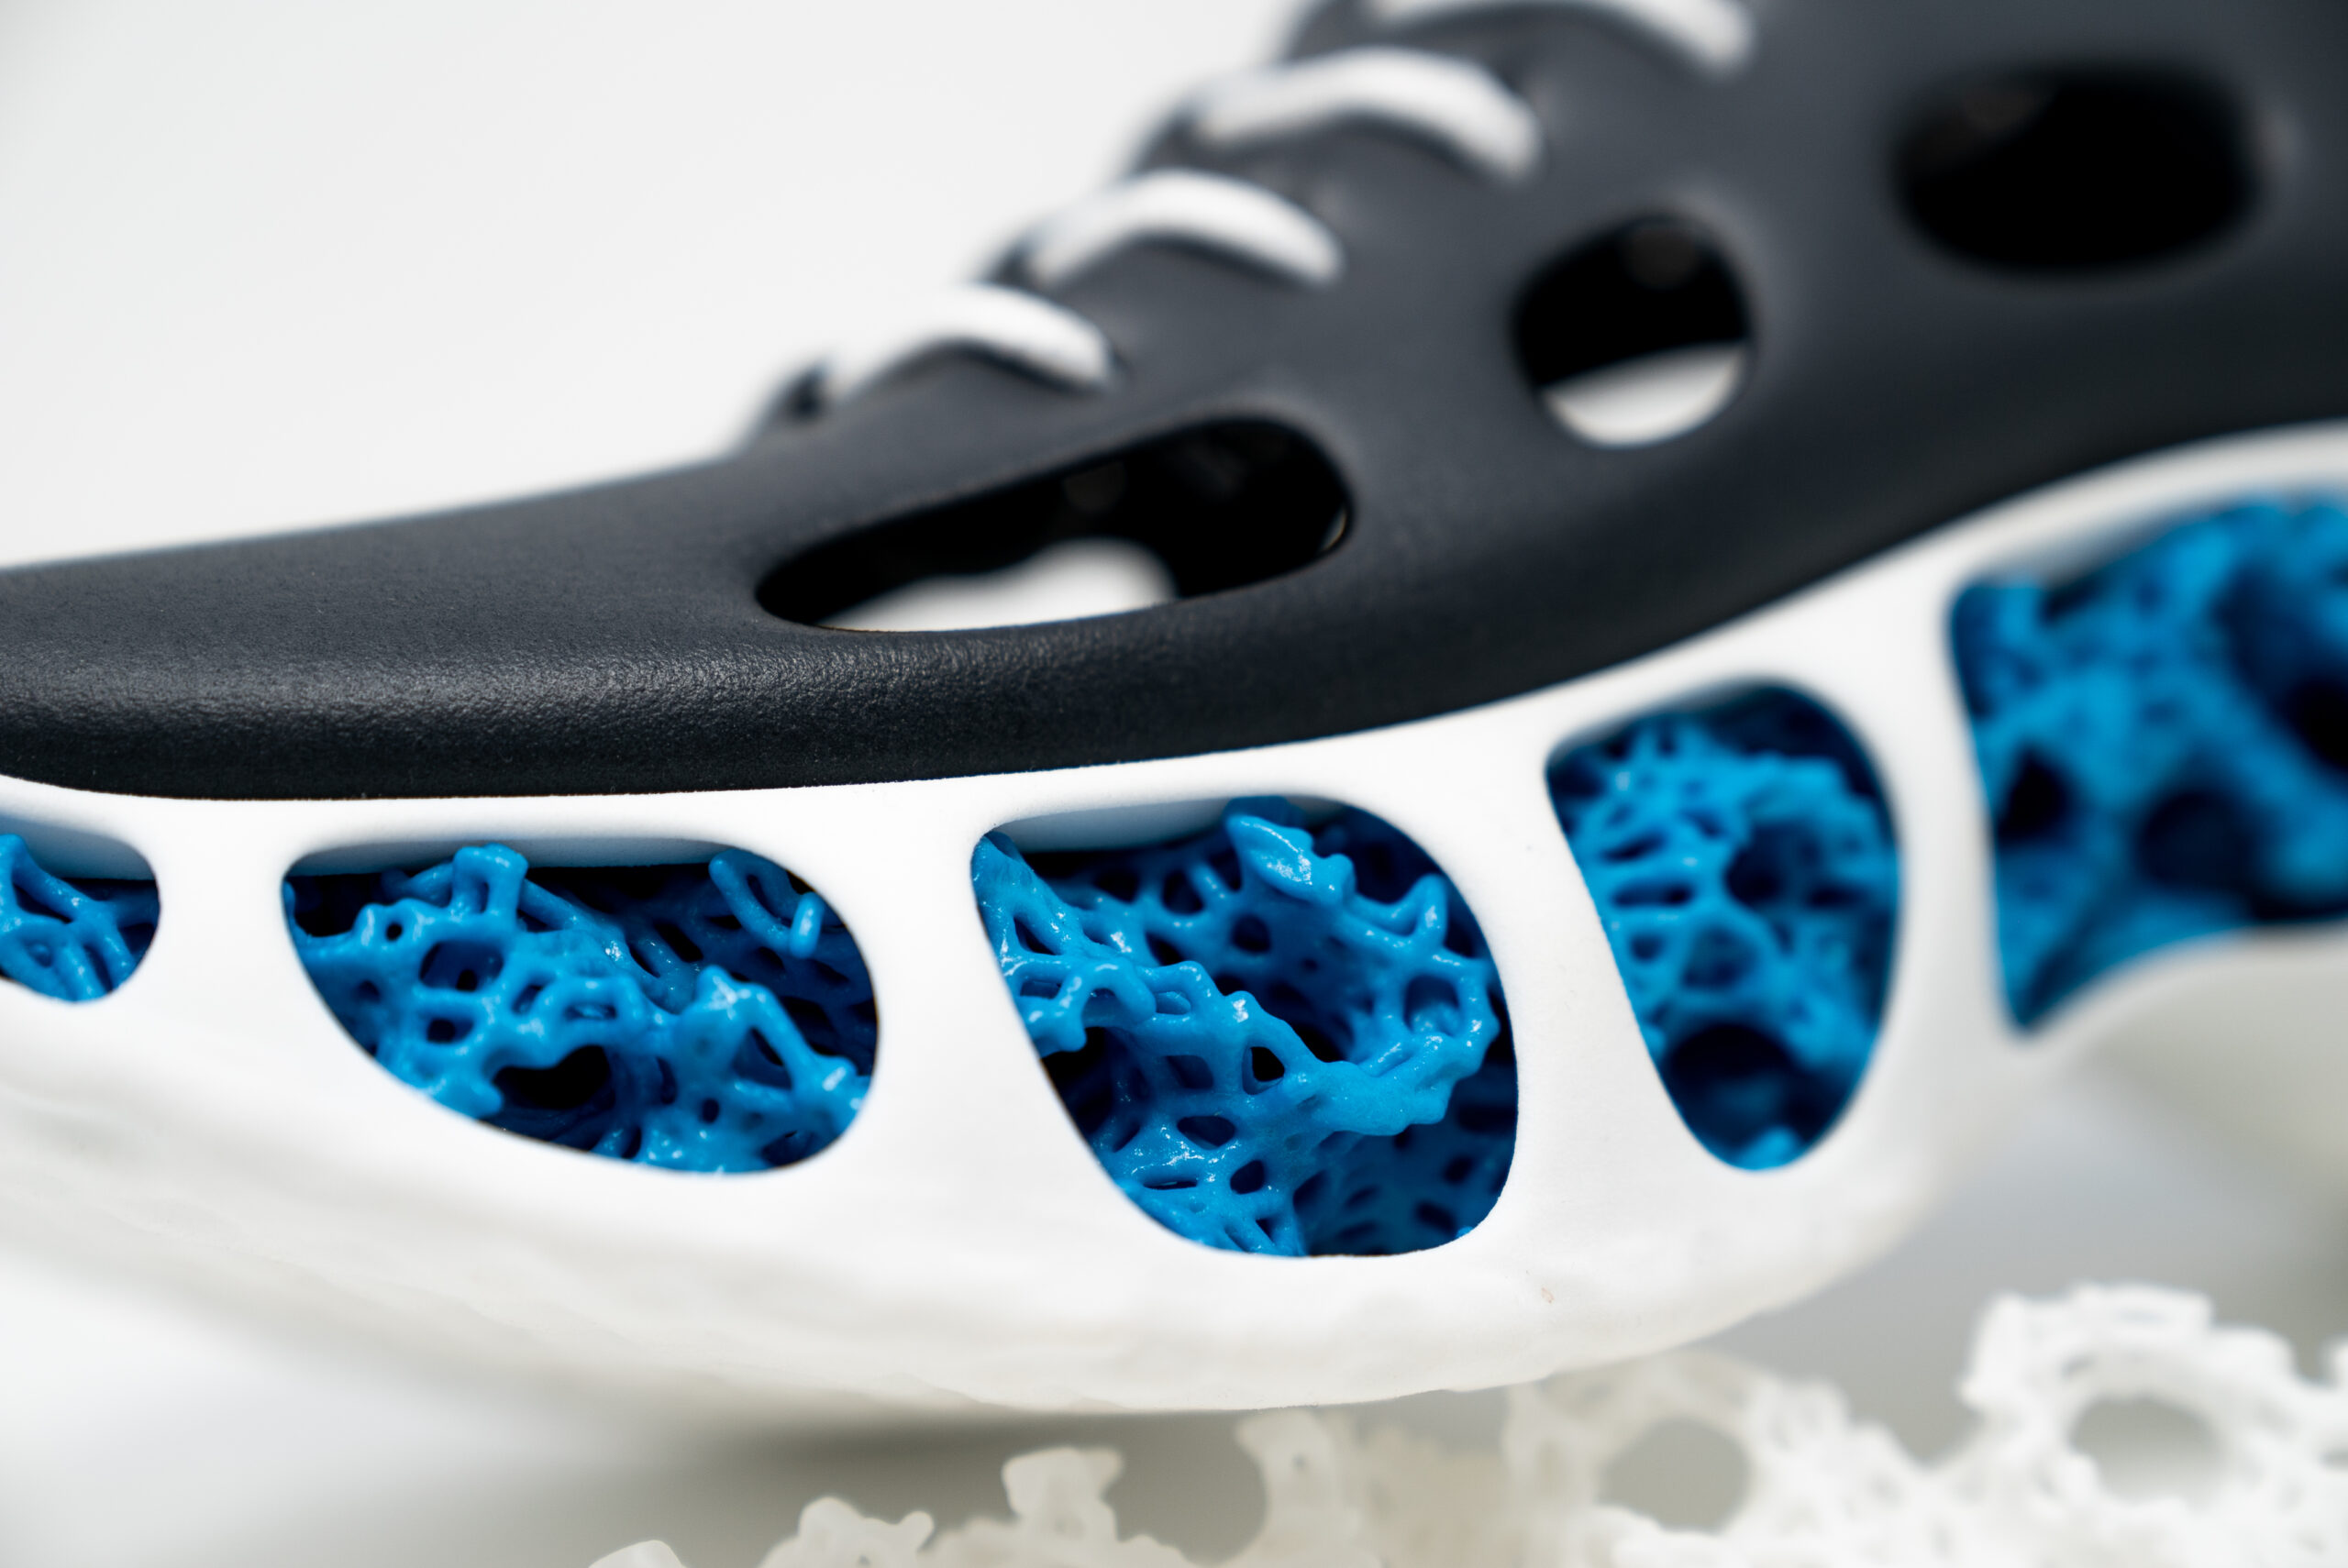 3D printing designed shoes